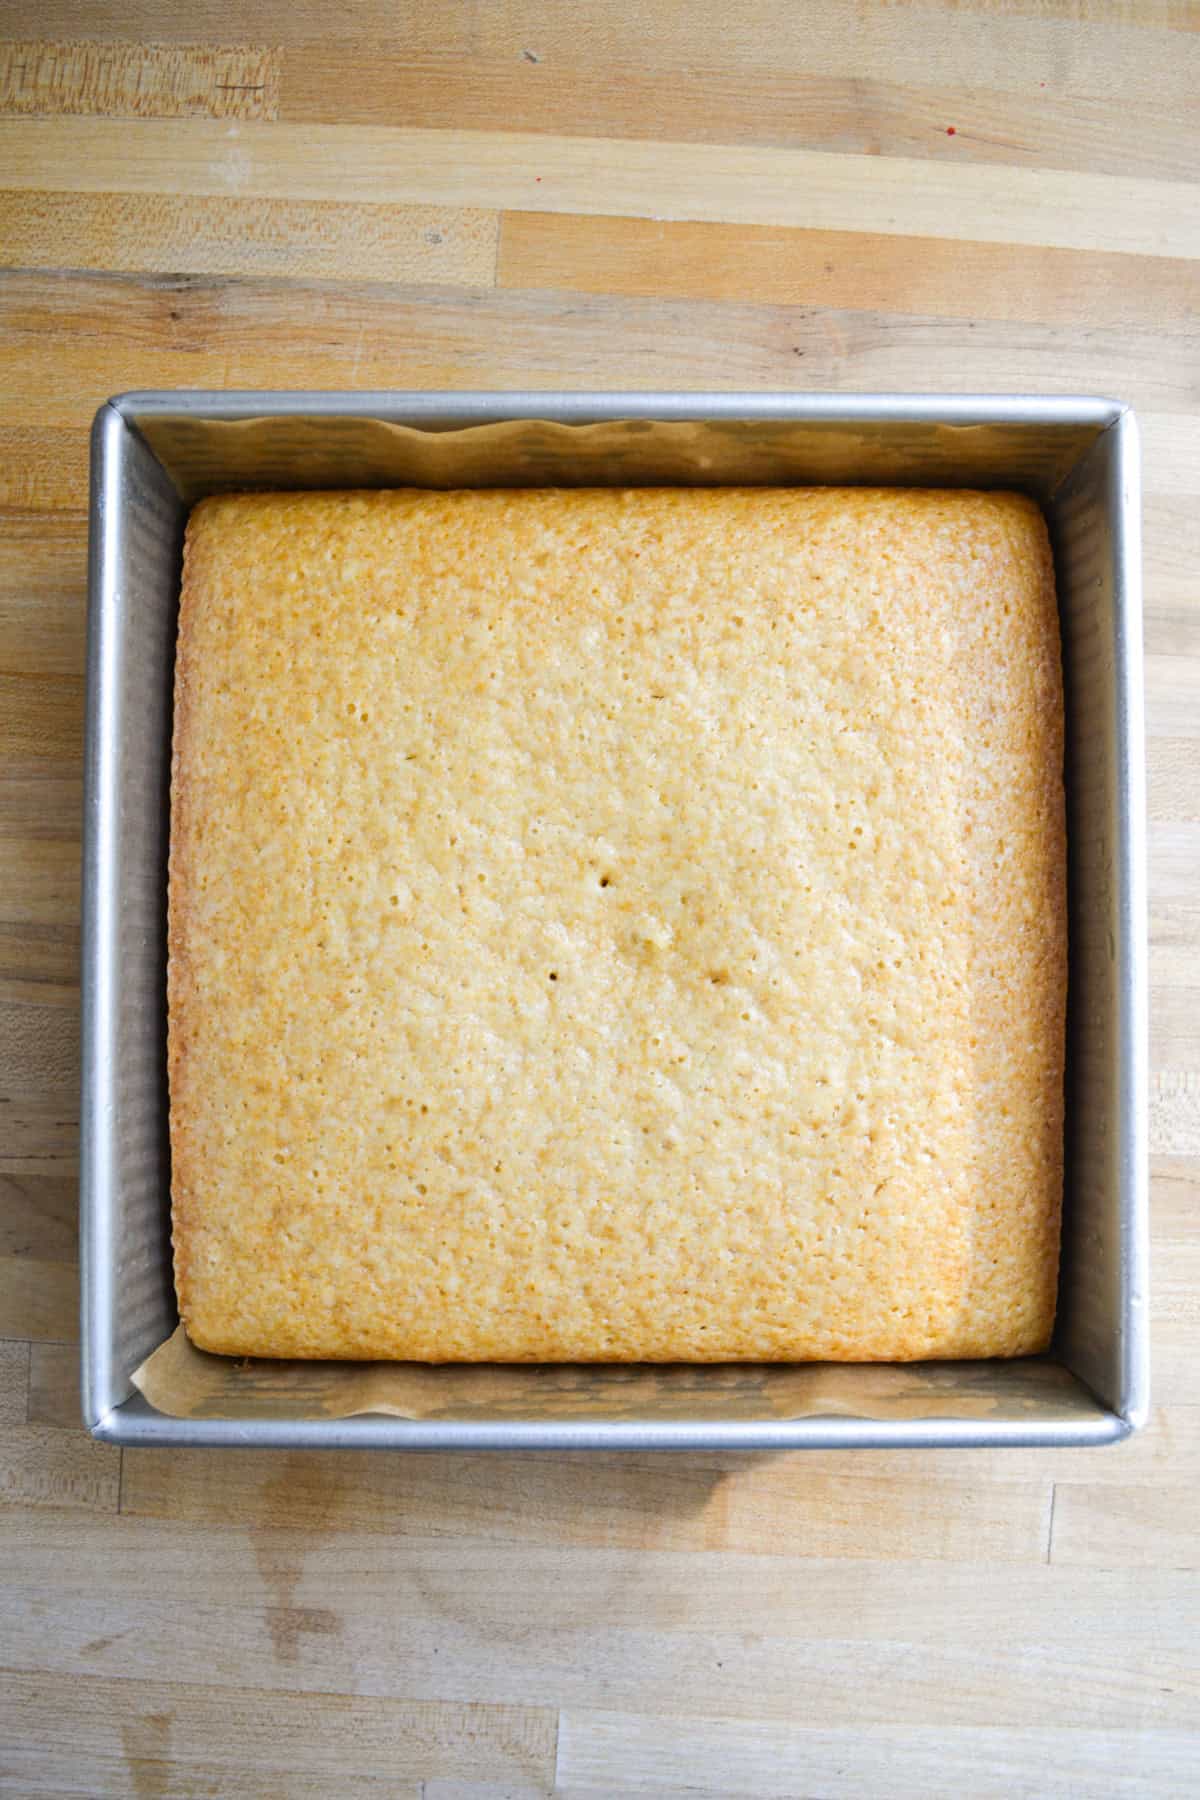 Baked vanilla cake in an 8x8 inch square pan on a wooden surface.